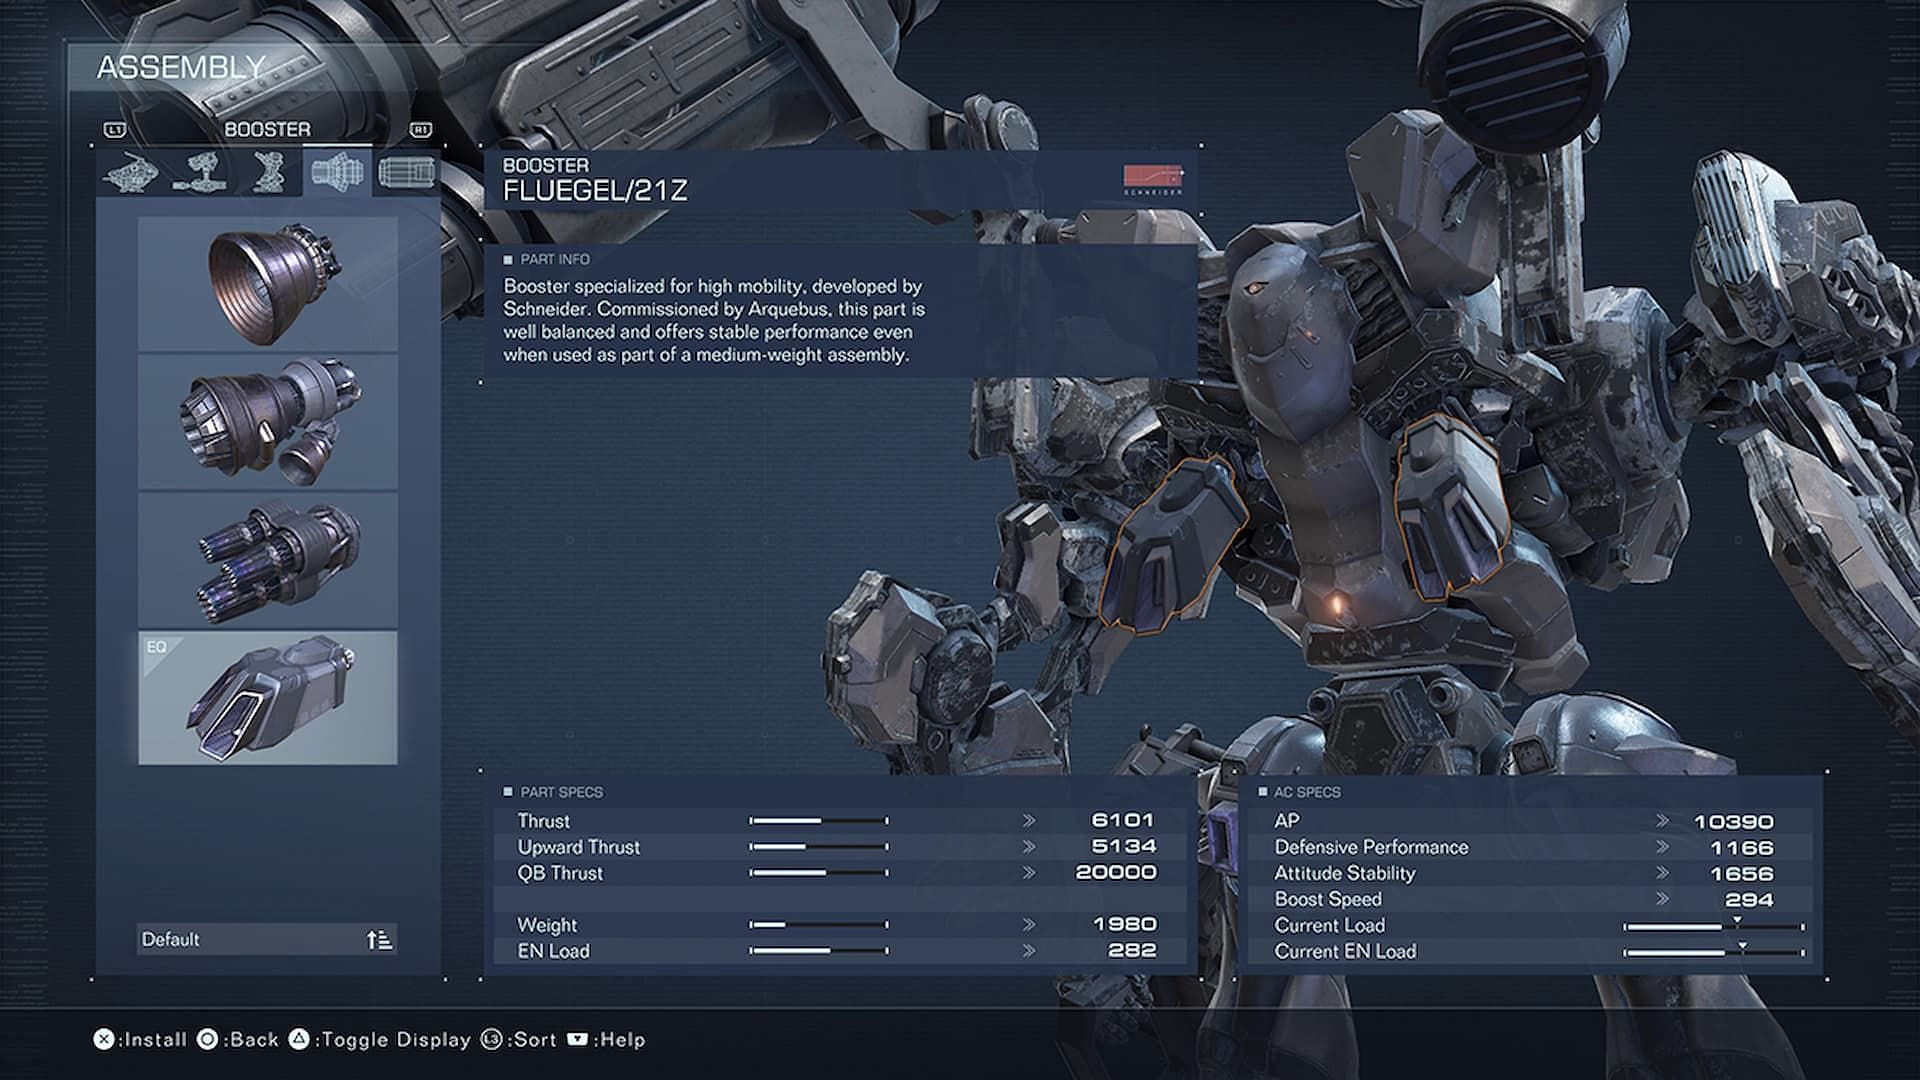 FLUEGEL is the booster choice for this Armored Core 6 build (Image via FromSoftware)